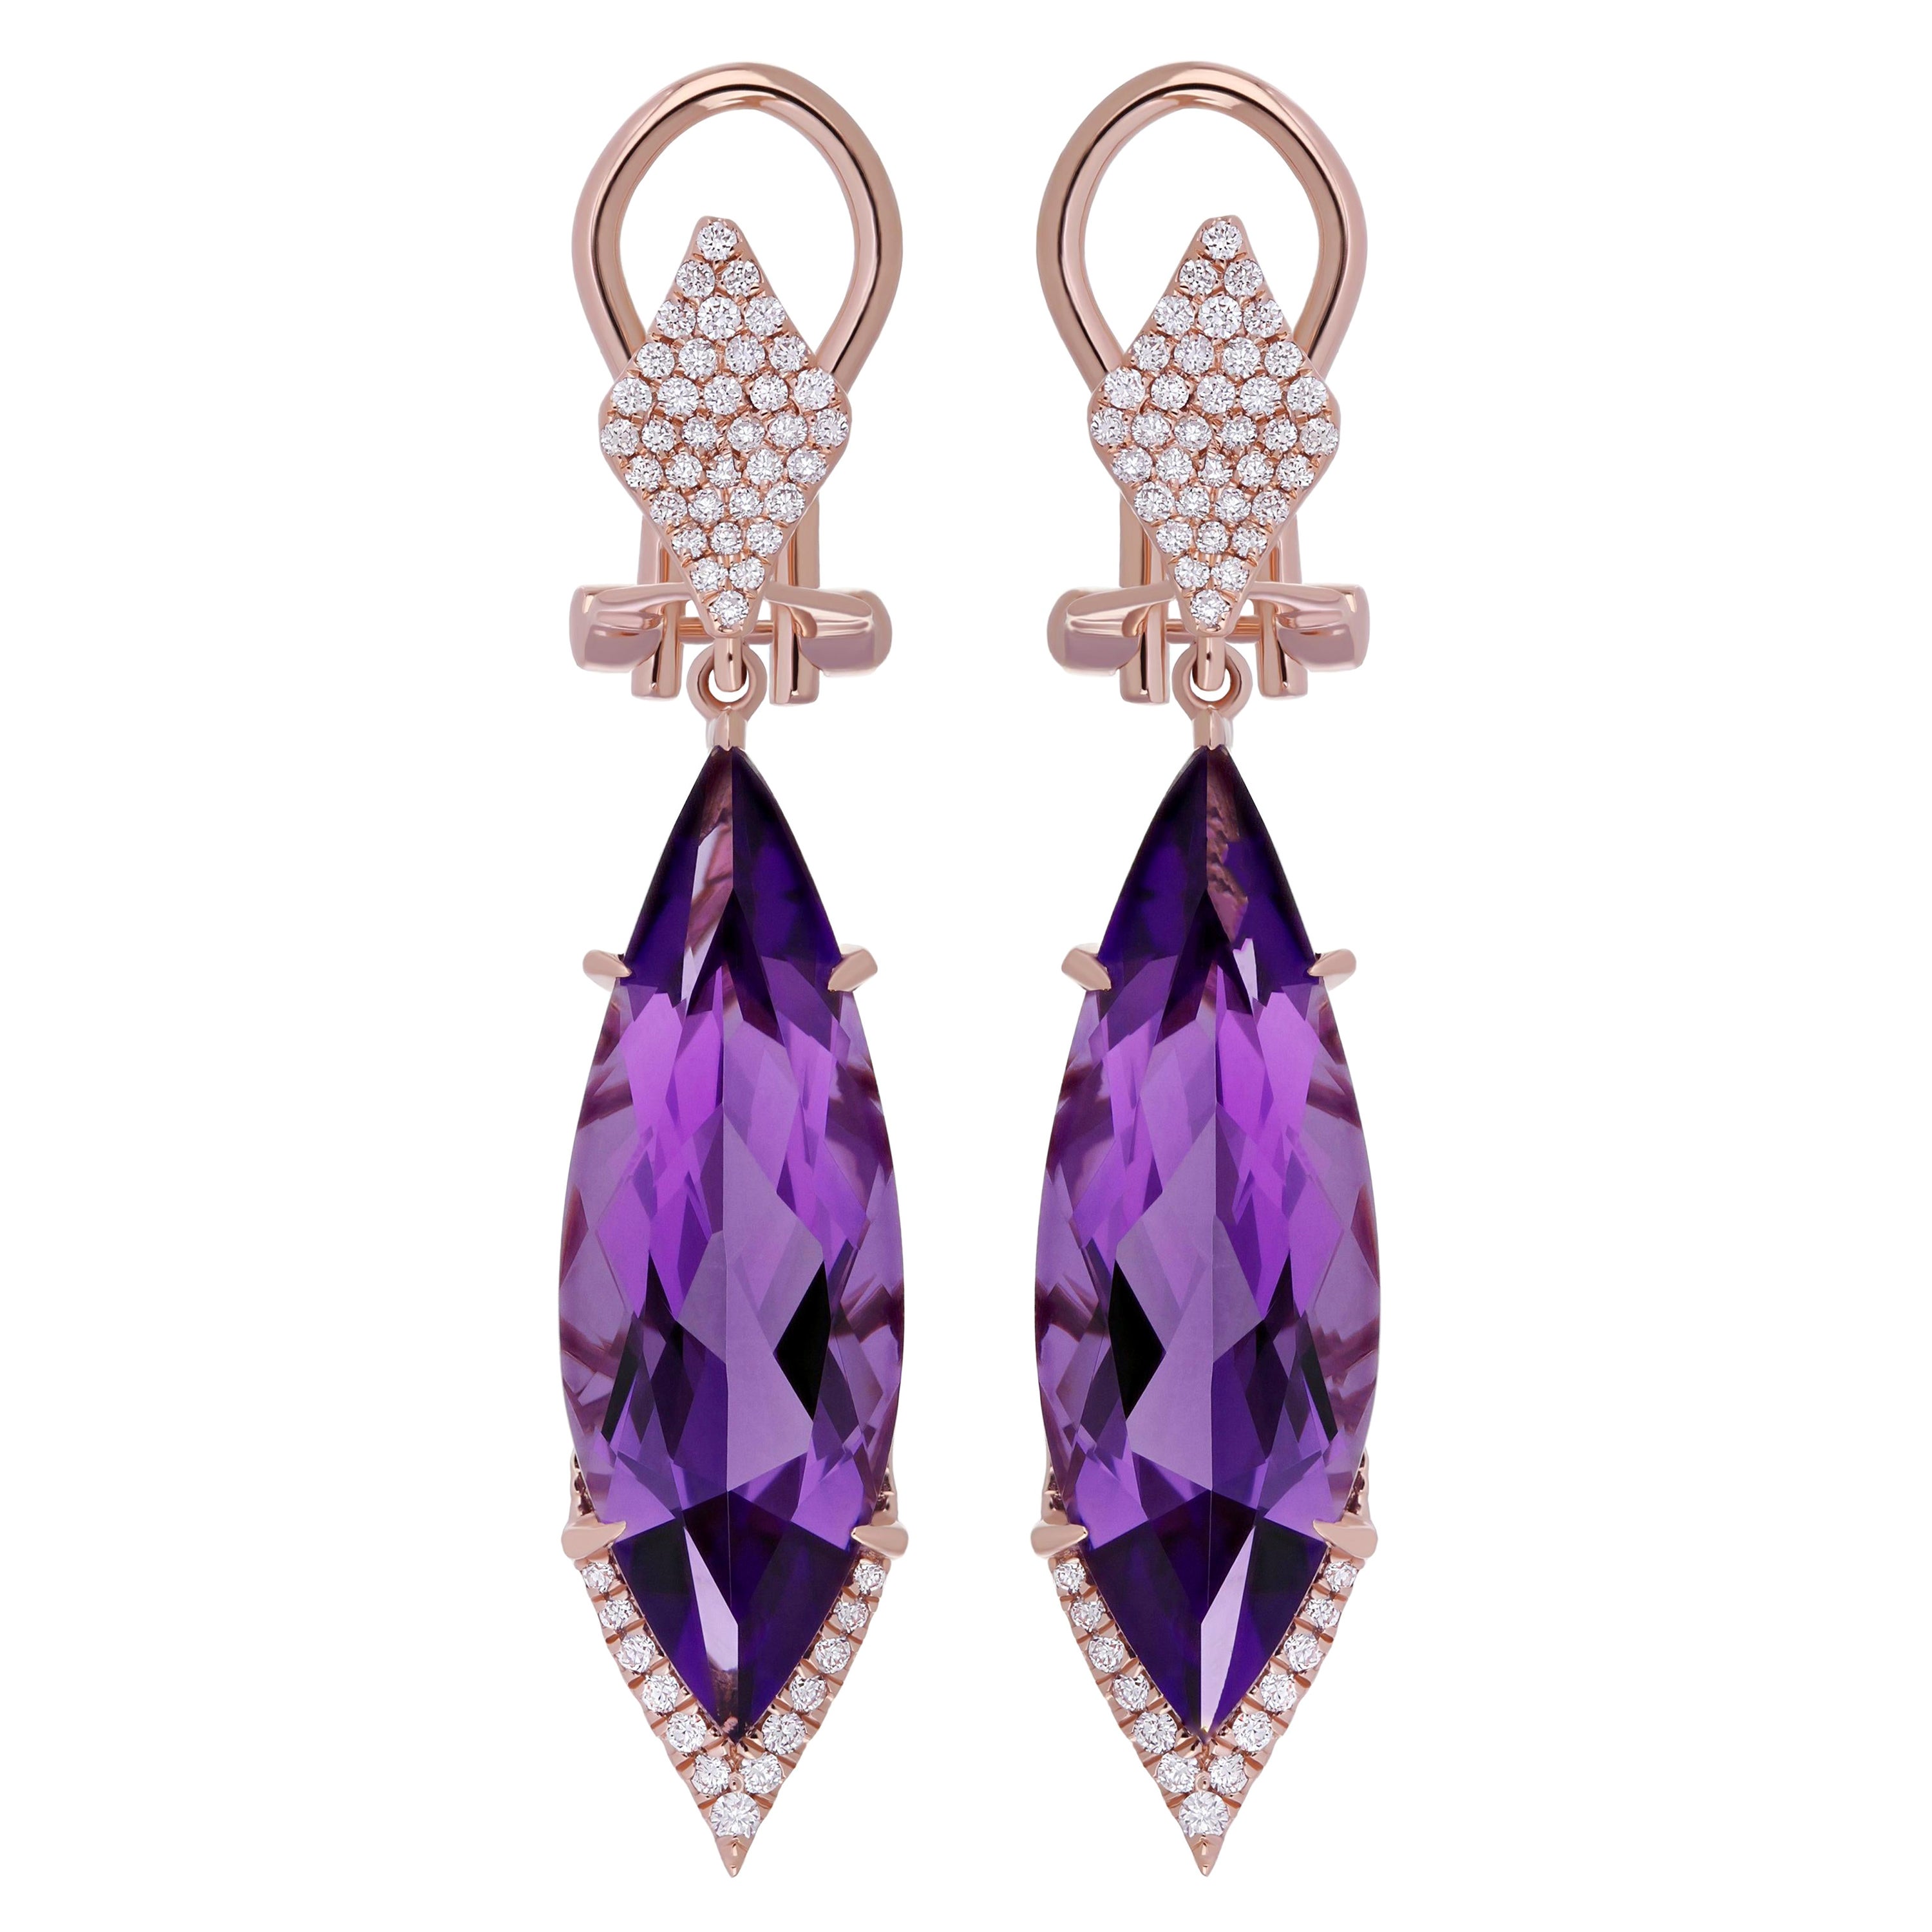 Amethyst and Diamond Studded Earring in 14Karat, Rose Gold